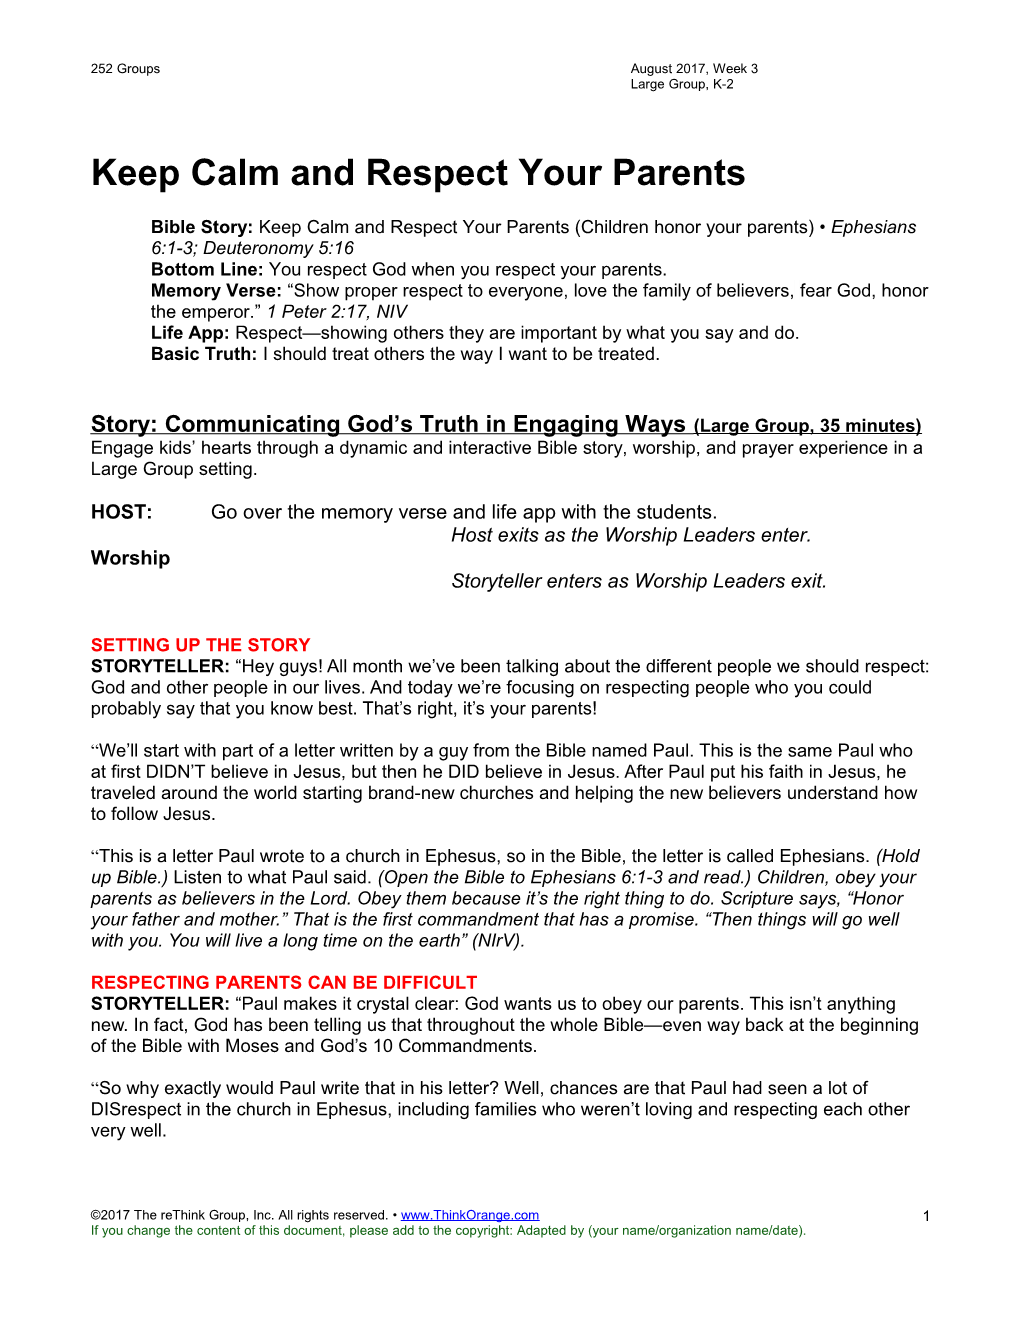 Keep Calm and Respect Your Parents